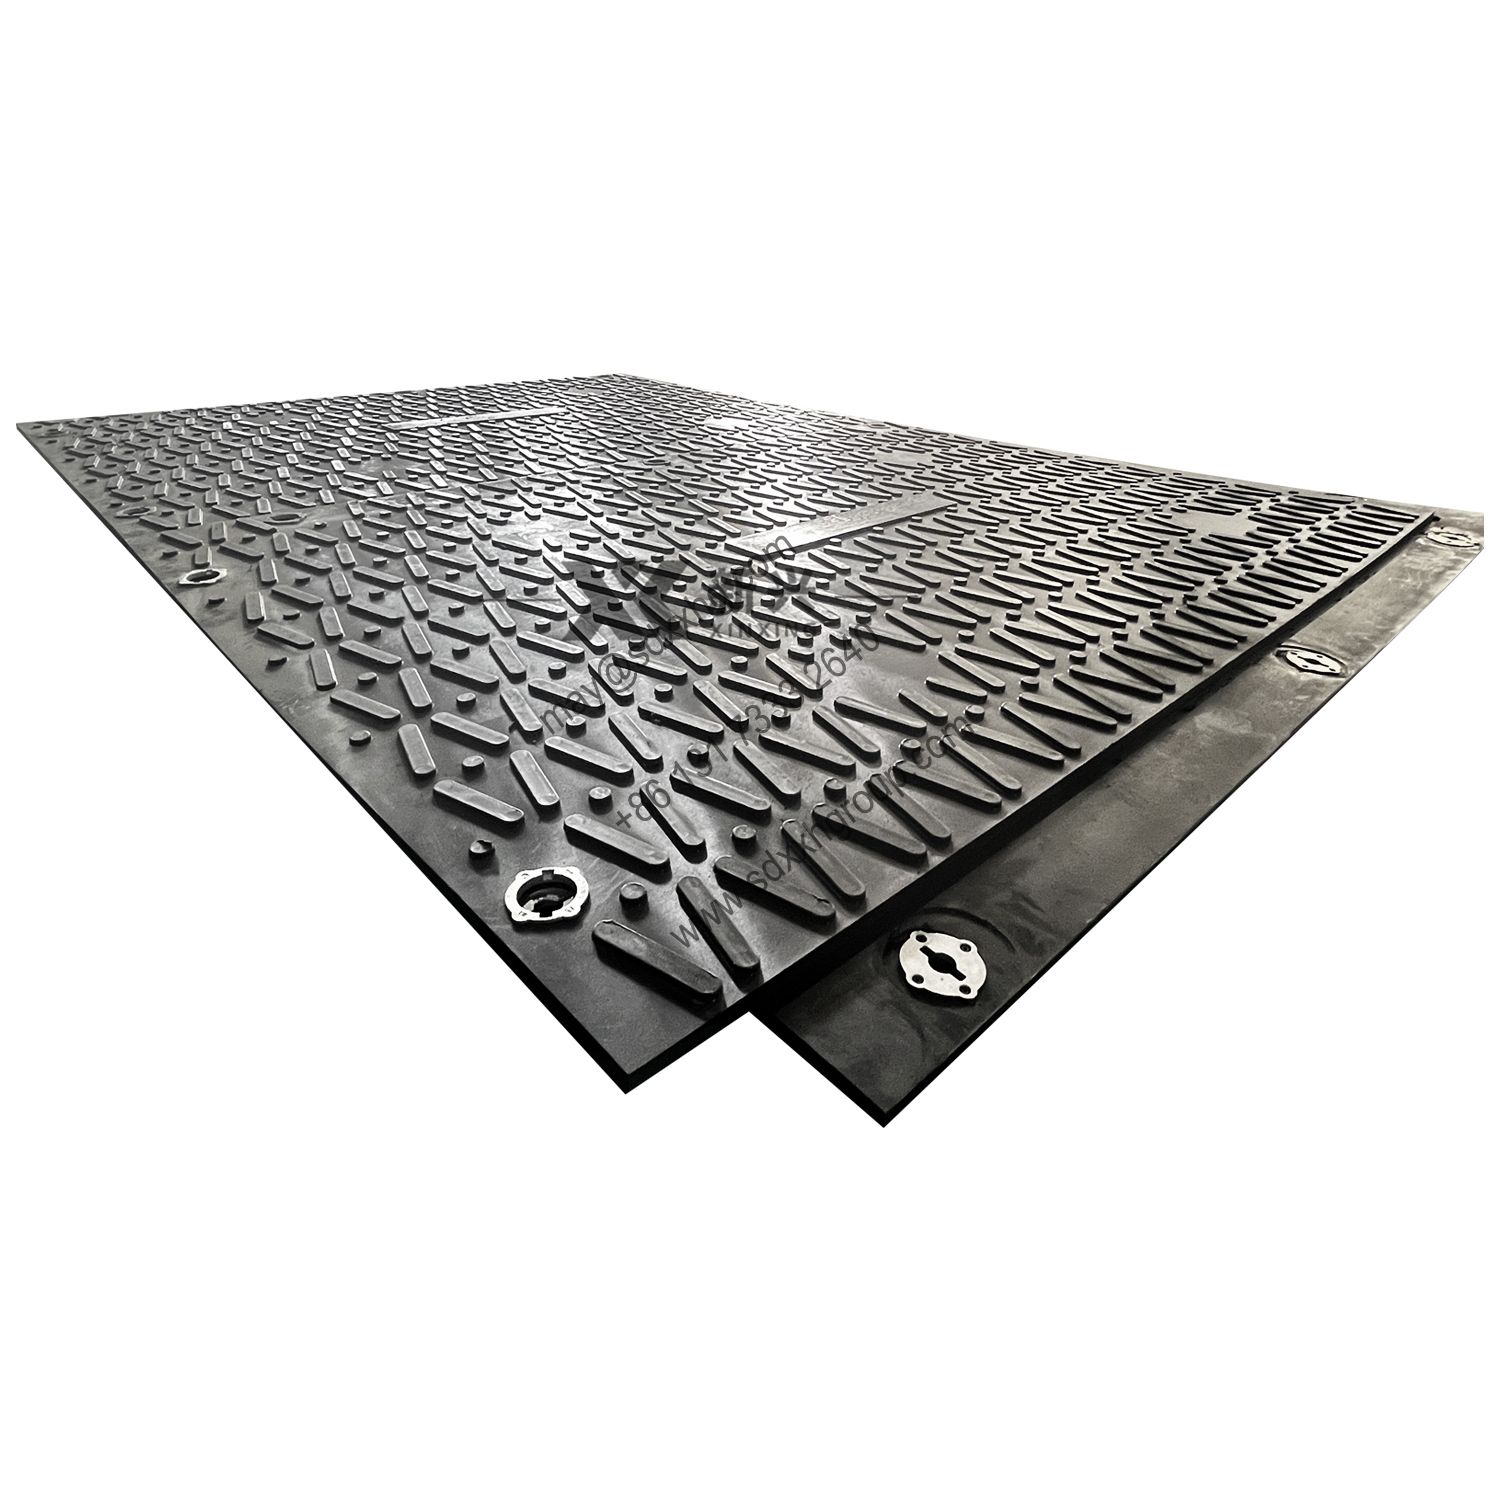 overlapping flange ground protection mats road access mats